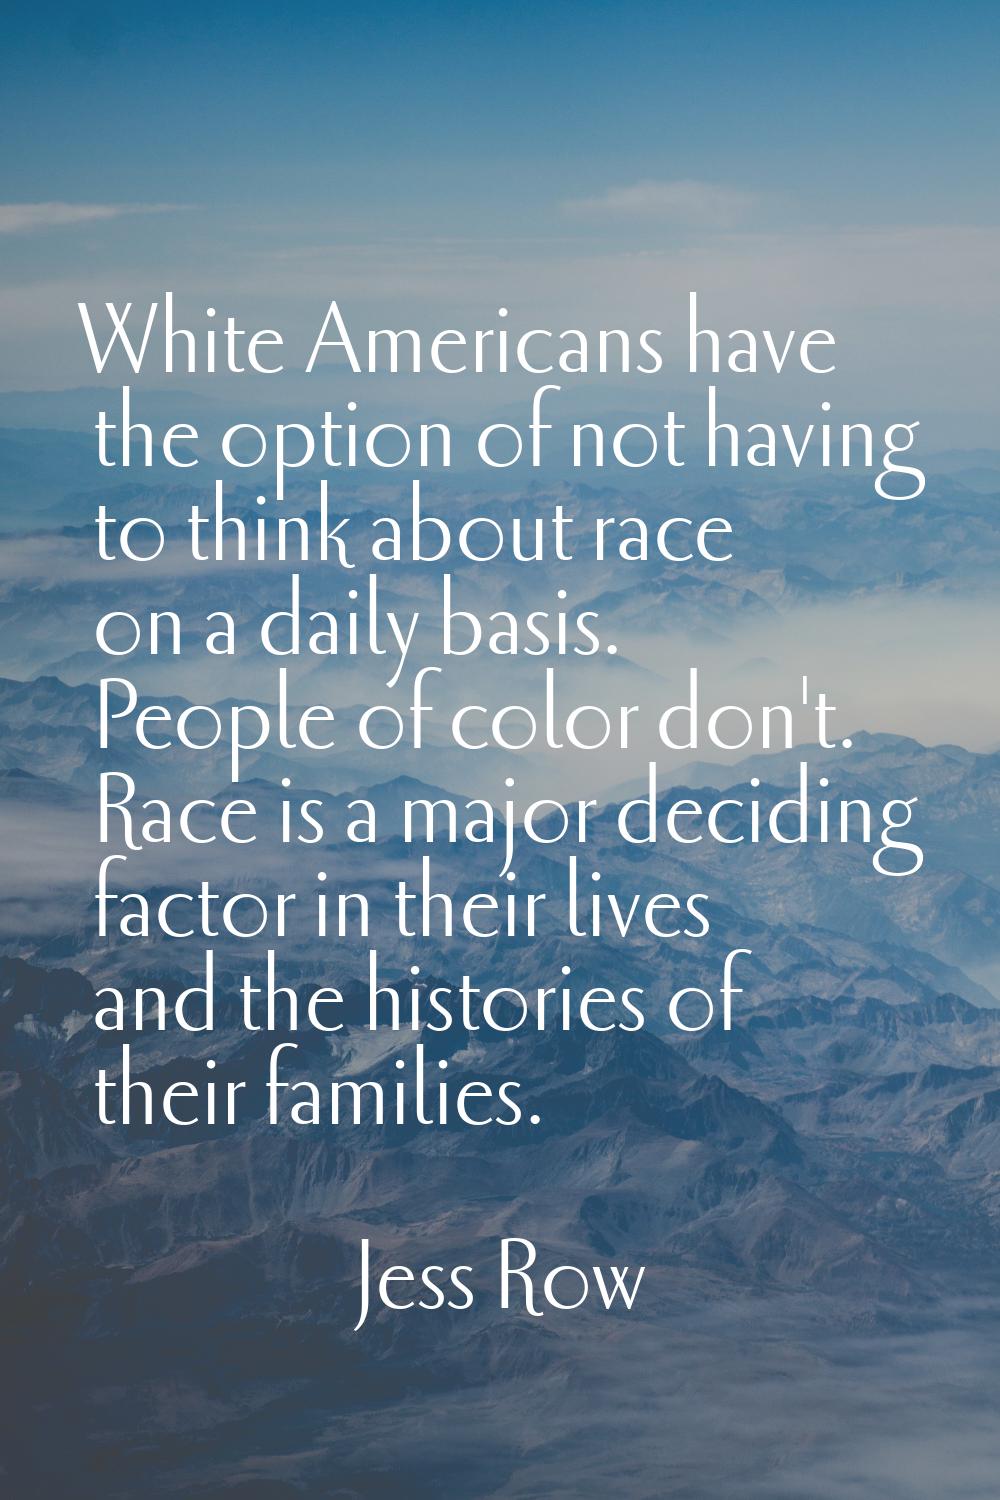 White Americans have the option of not having to think about race on a daily basis. People of color